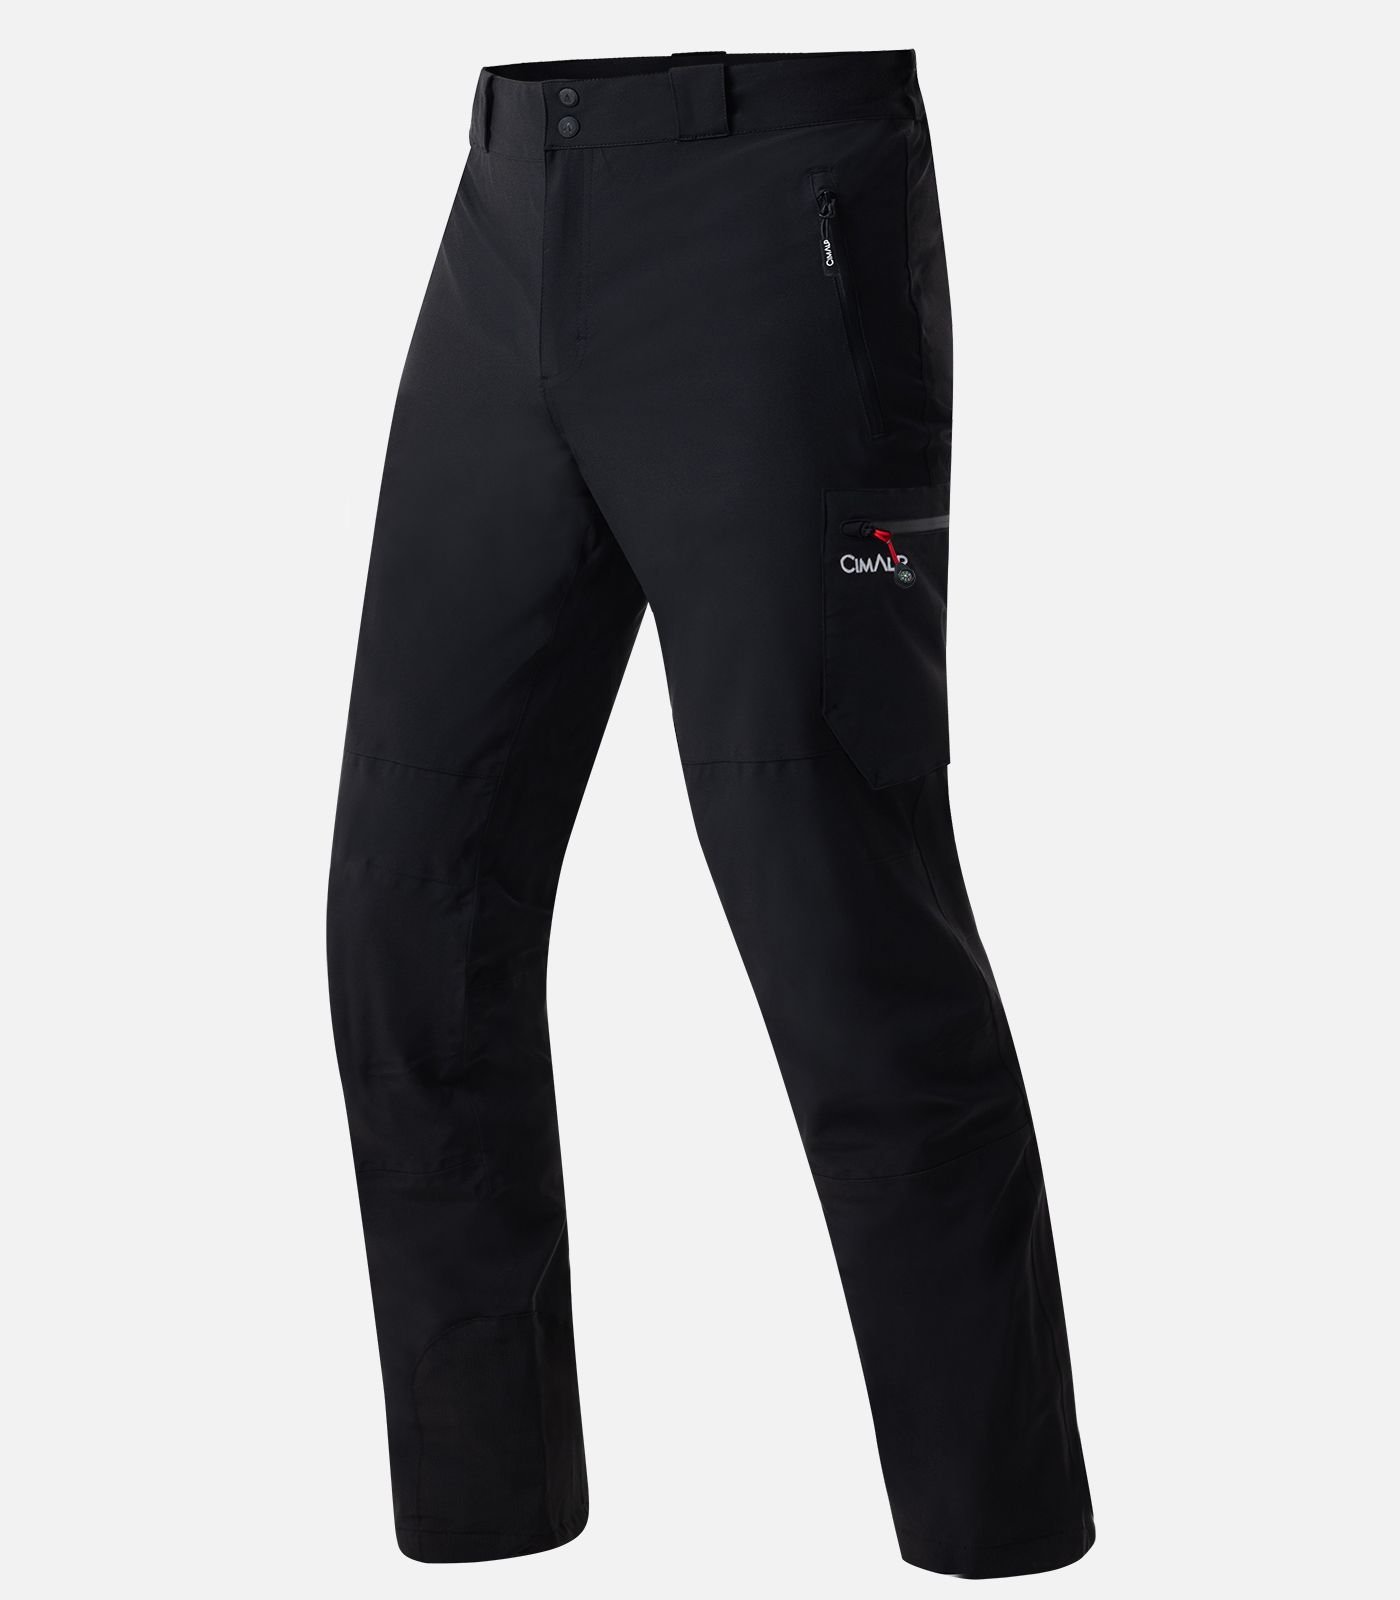 Men's Walking Trousers, Stretchy, Lightweight Hiking Trousers